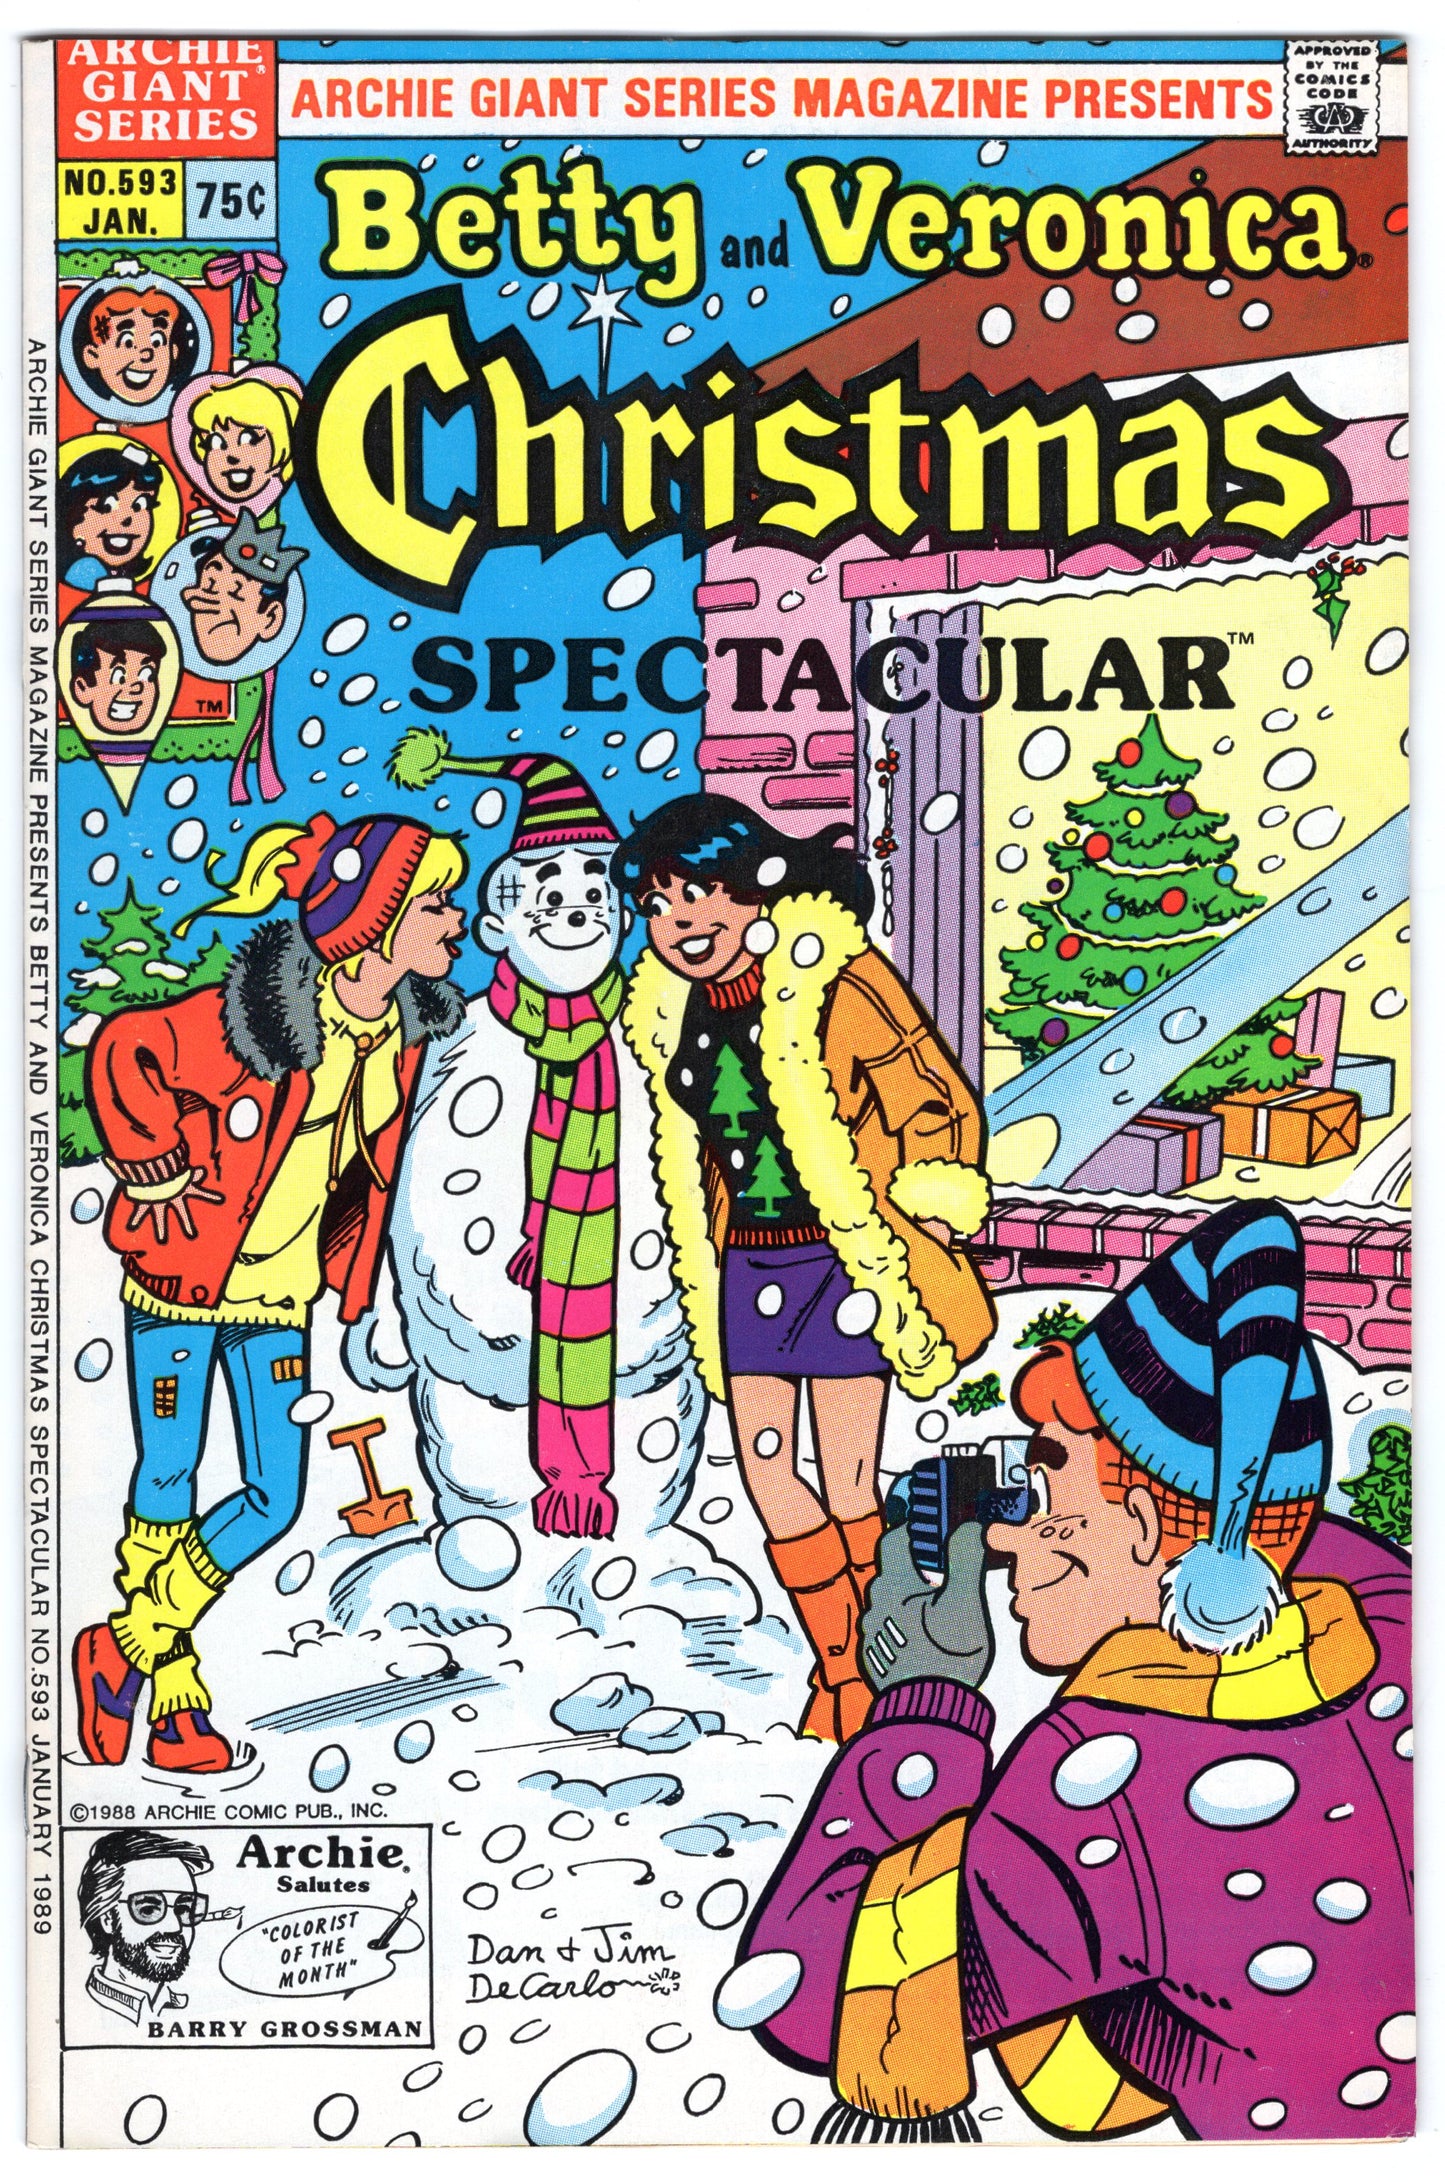 Archie Giant Series Magazine Presents - Betty & Veronica Christmas Spectacular #593 (Jan. 1989 - Archie Pub.,) VF